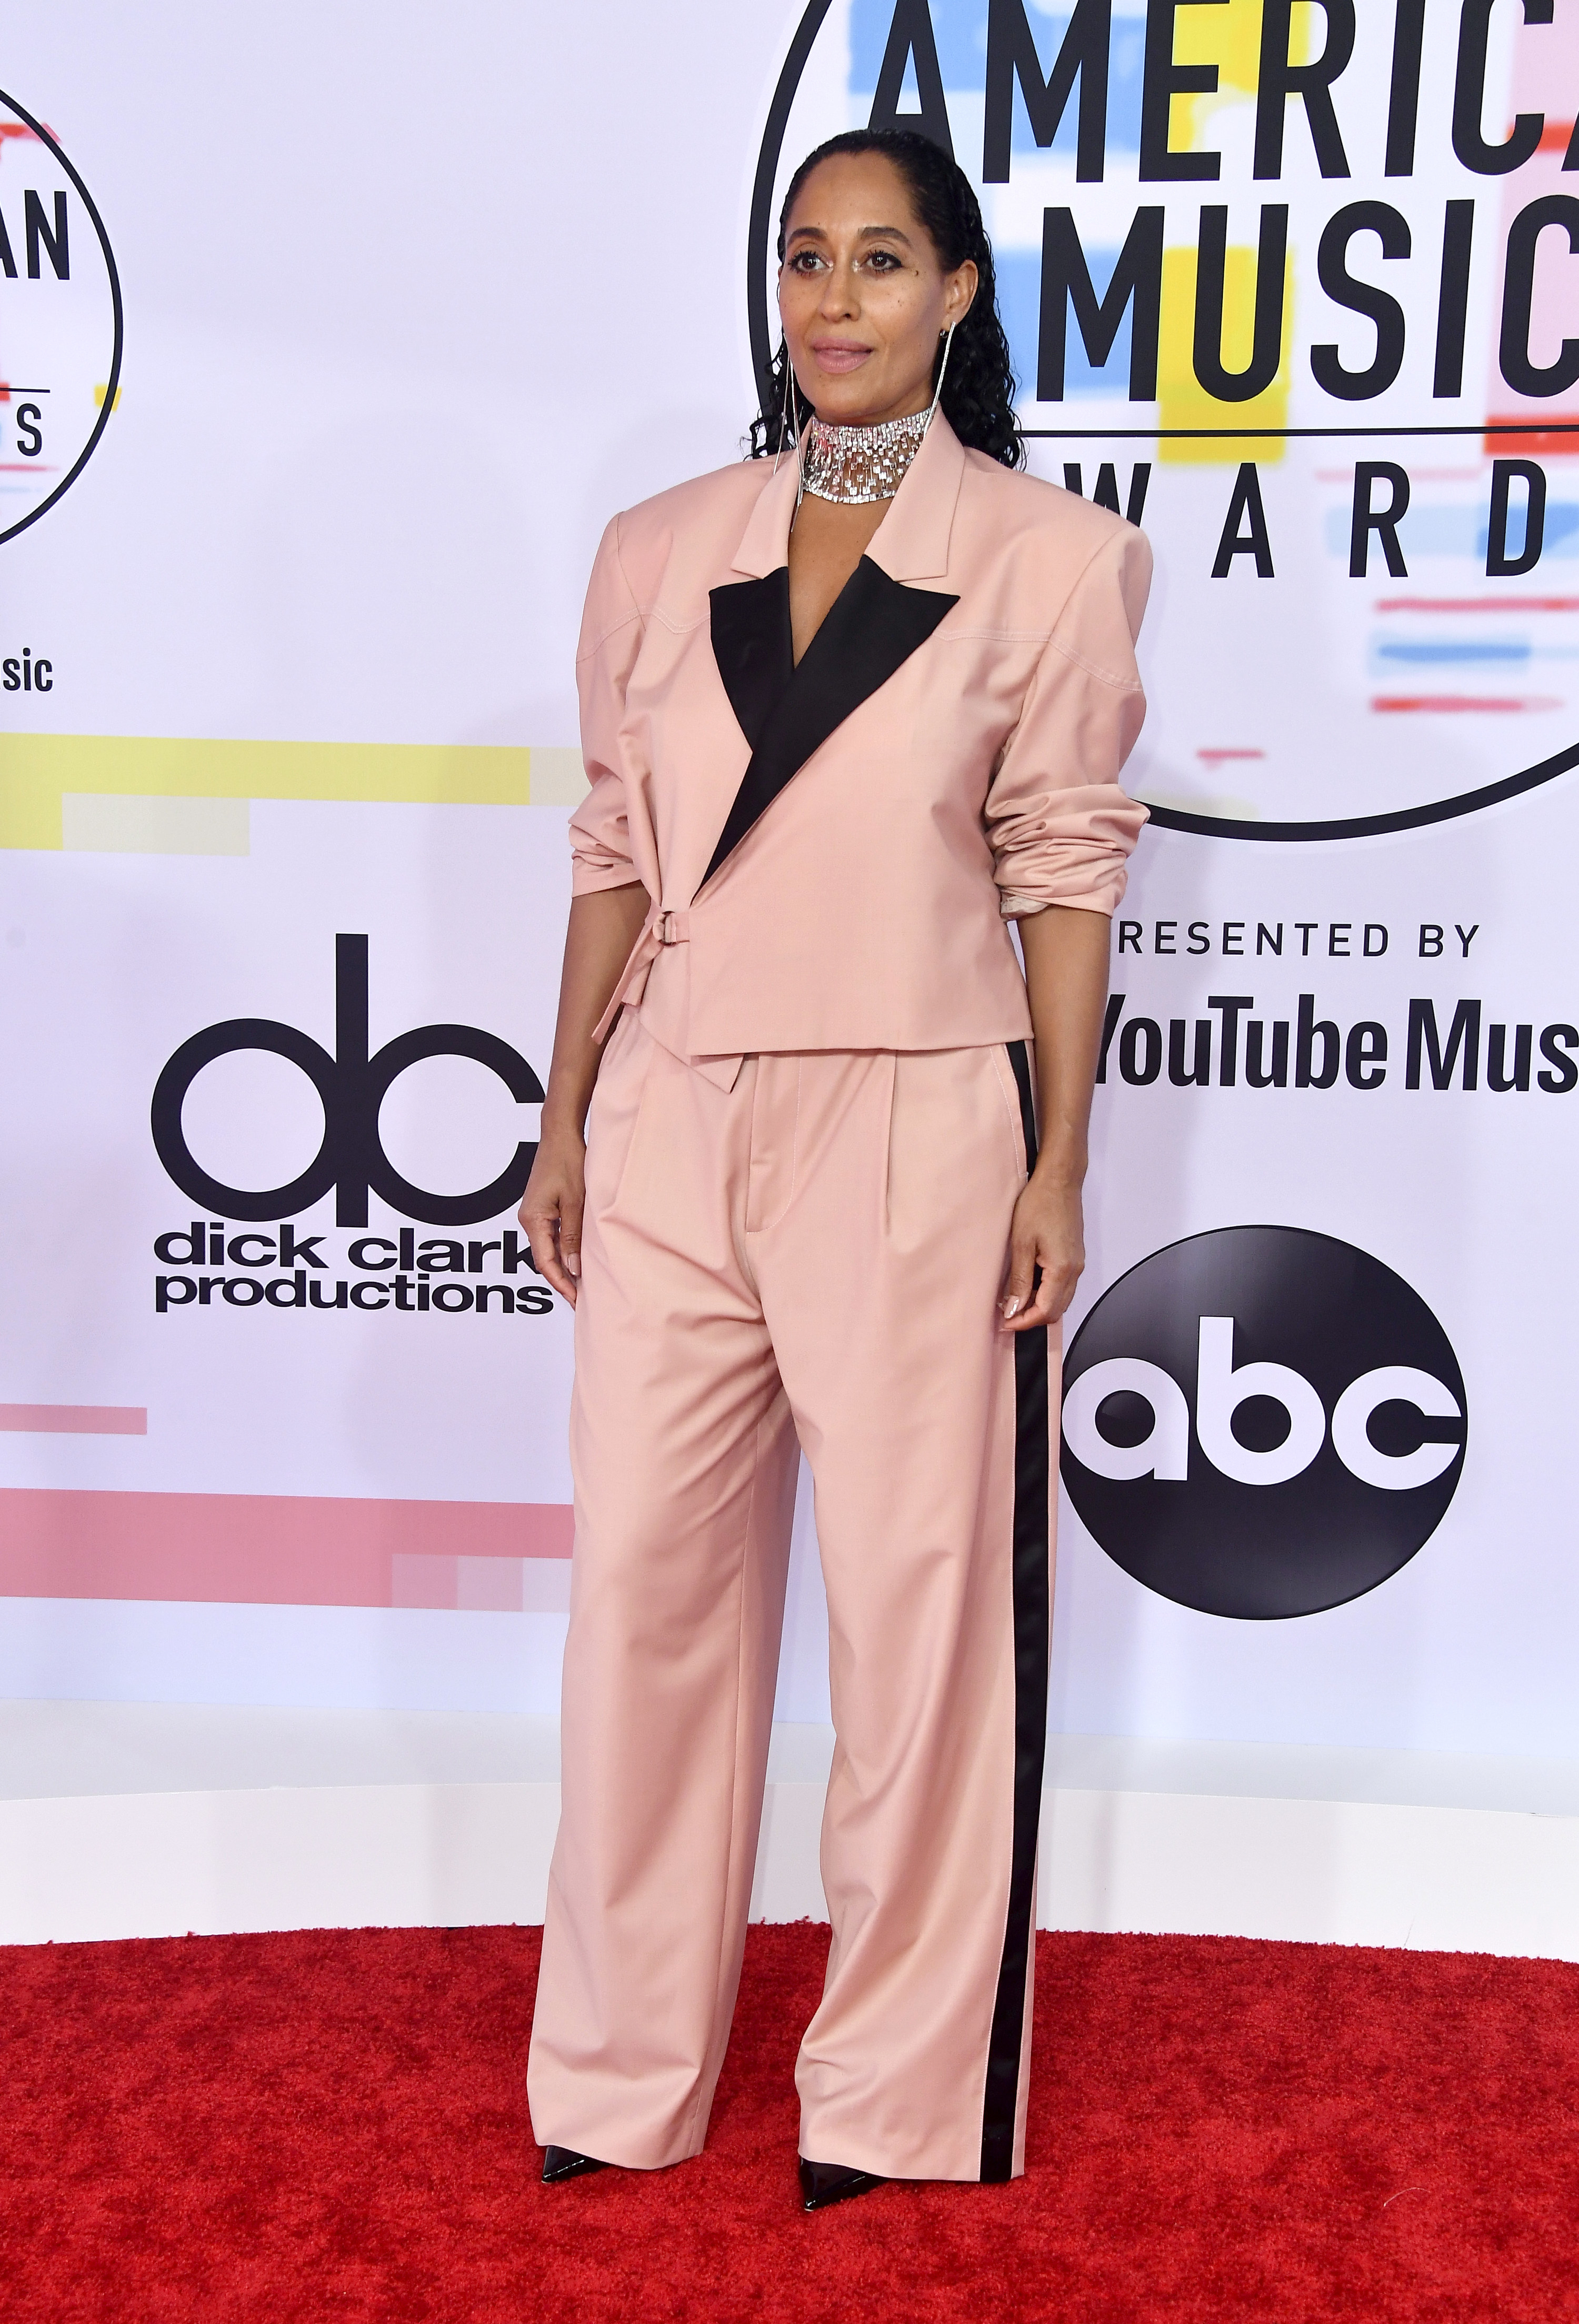 Tracee Ellis Ross at the 2018 American Music Awards red carpet